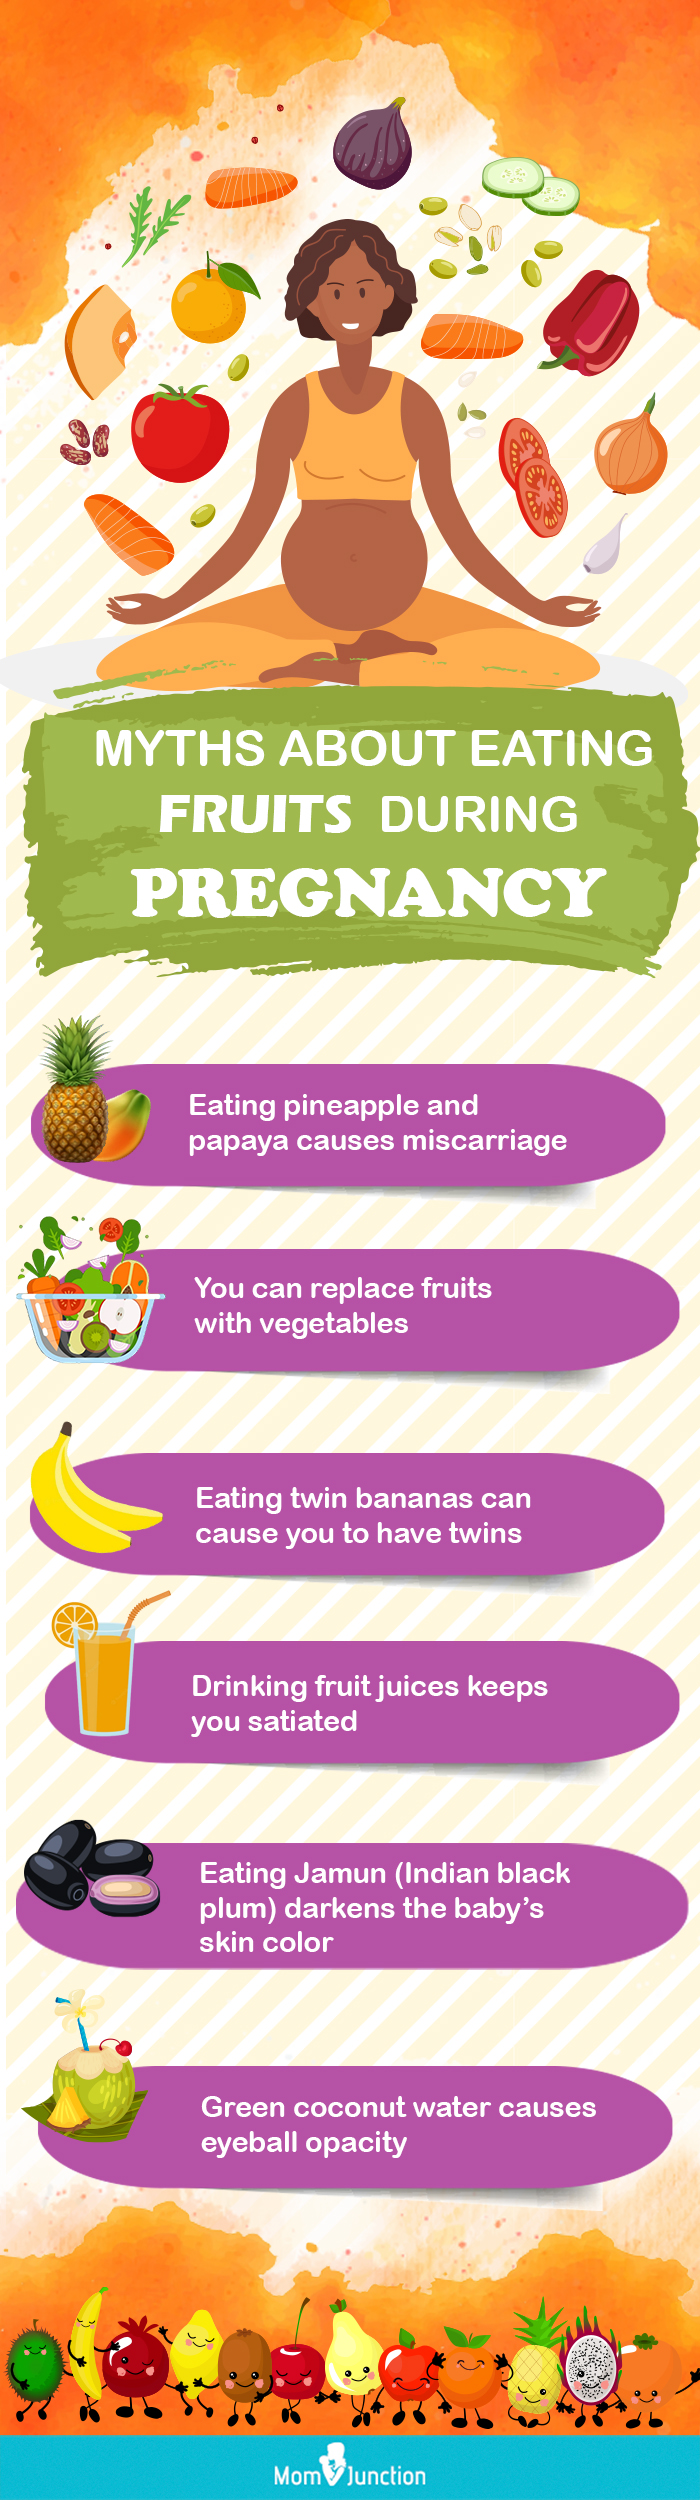 common misconceptions associated with eating fruits during pregnancy [infographic]